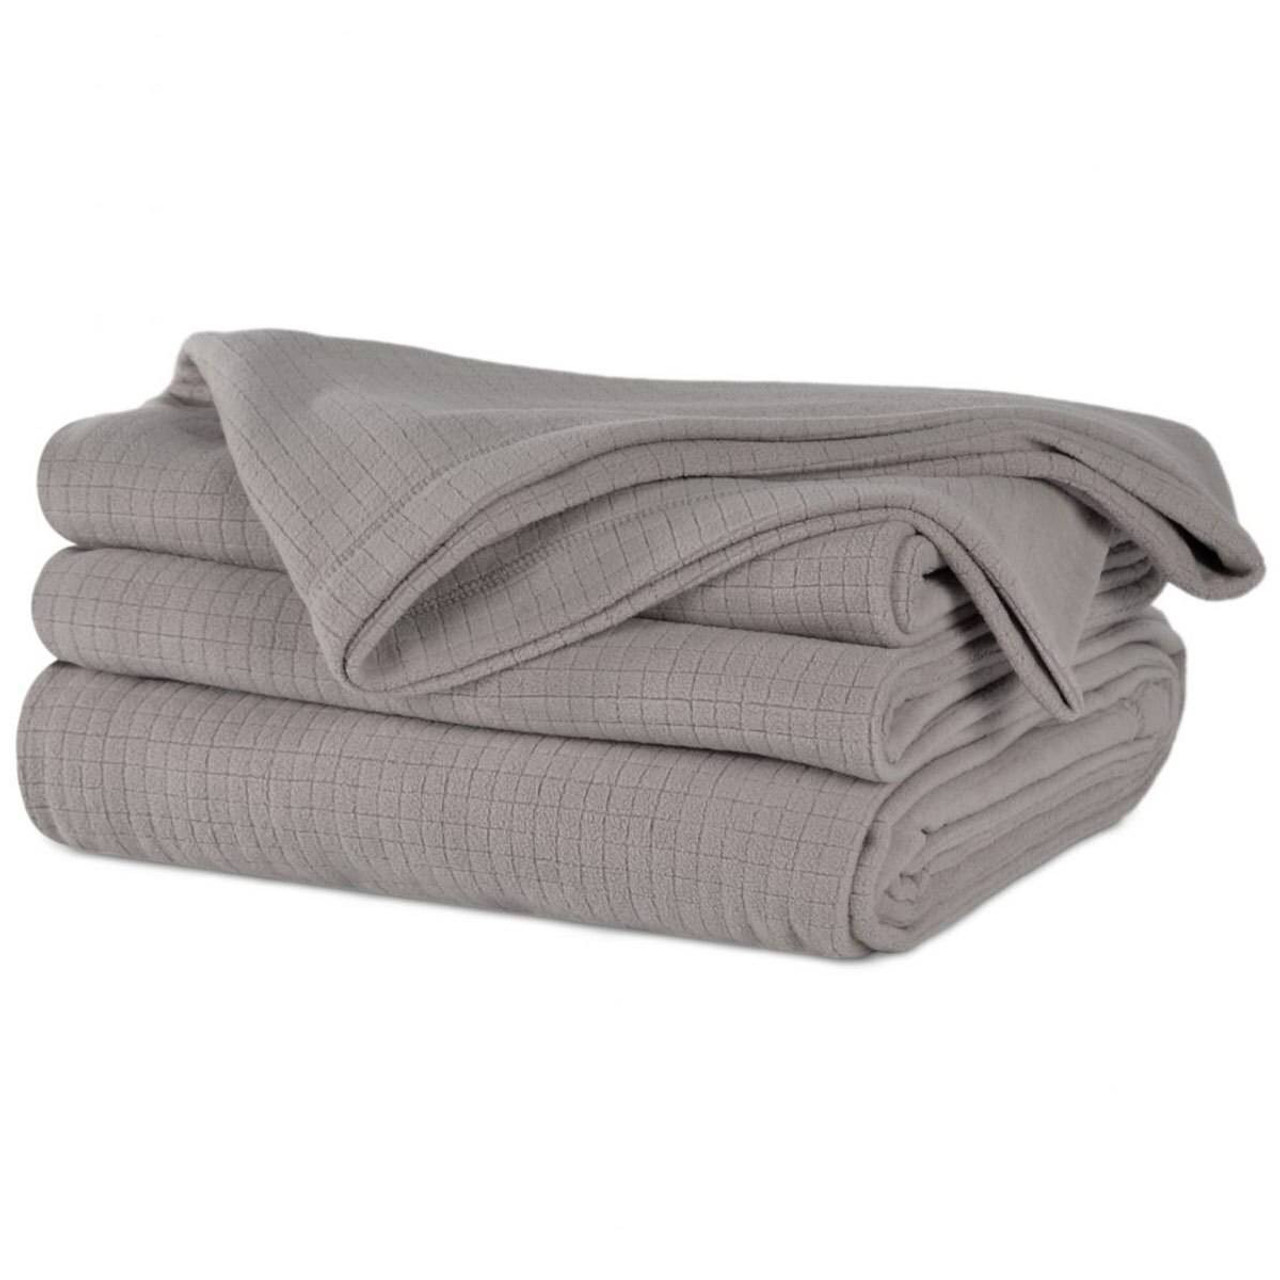 BERKSHIRE or POLARTEC BLANKETS or 270 GSM